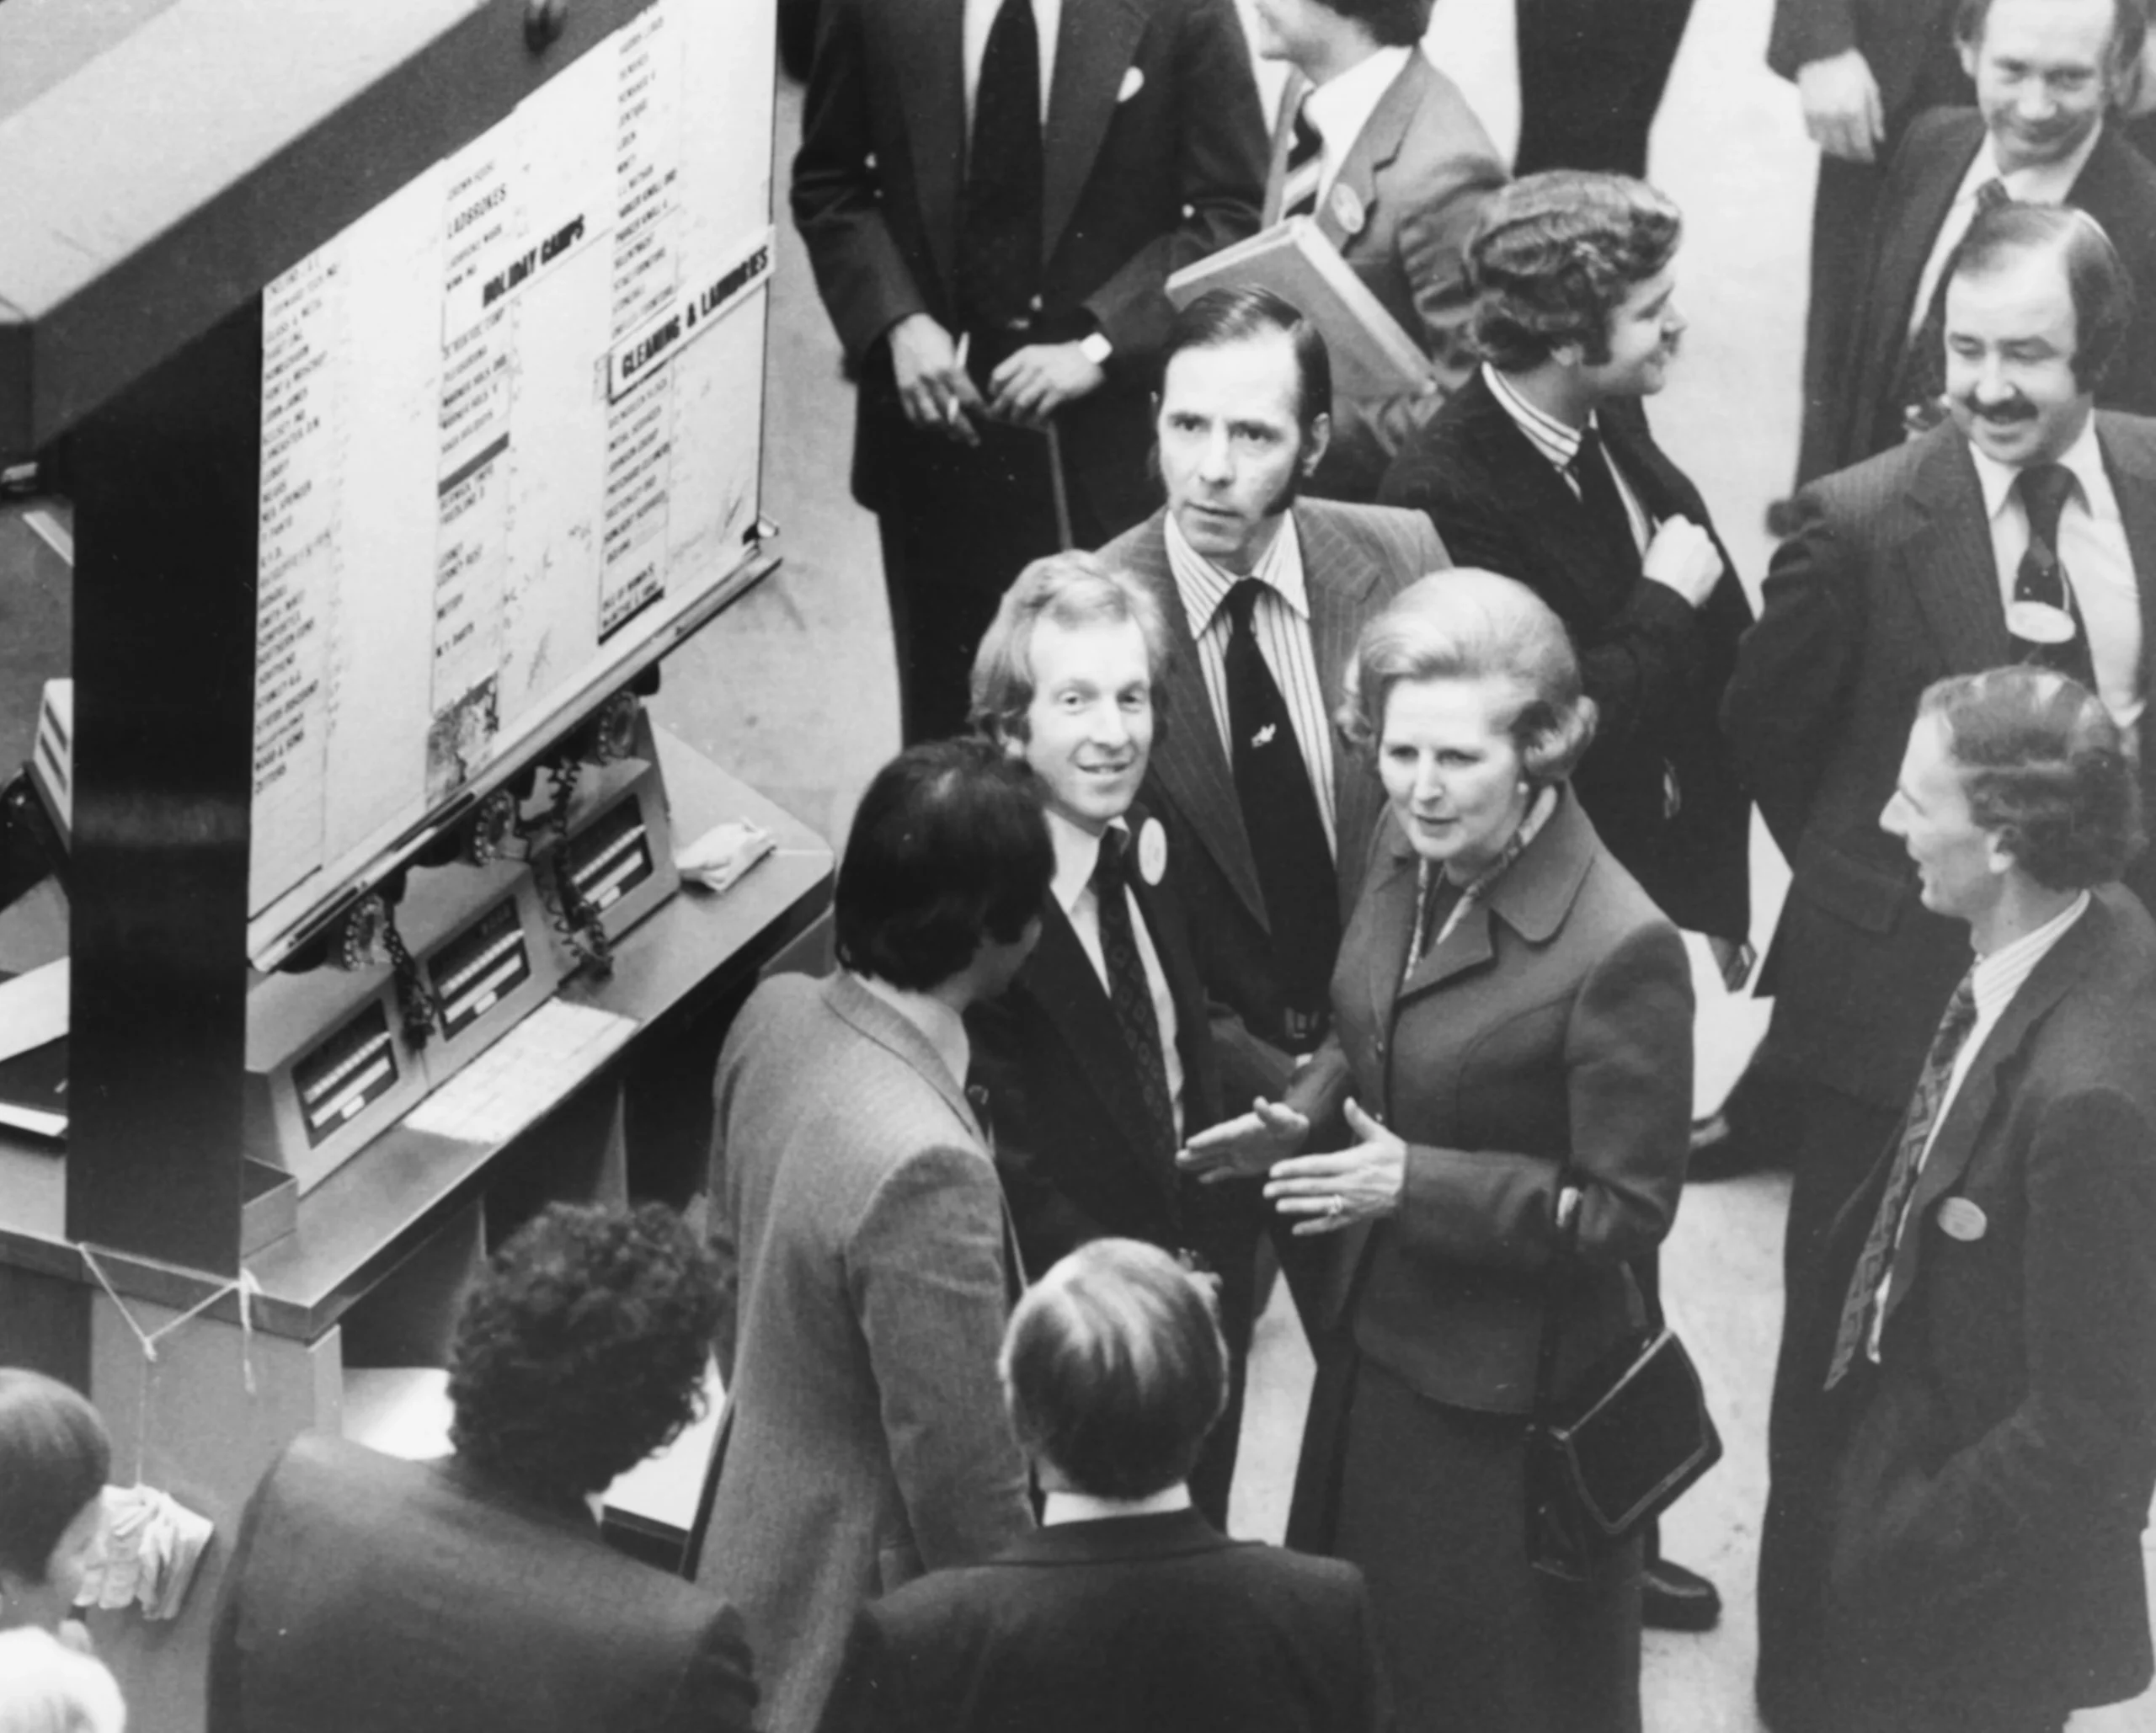 Thatcher and her colleagues in a hurry to privatize, clearing debts, writing them off, and selling off industries cheaply. [Image credit: Getty Images]